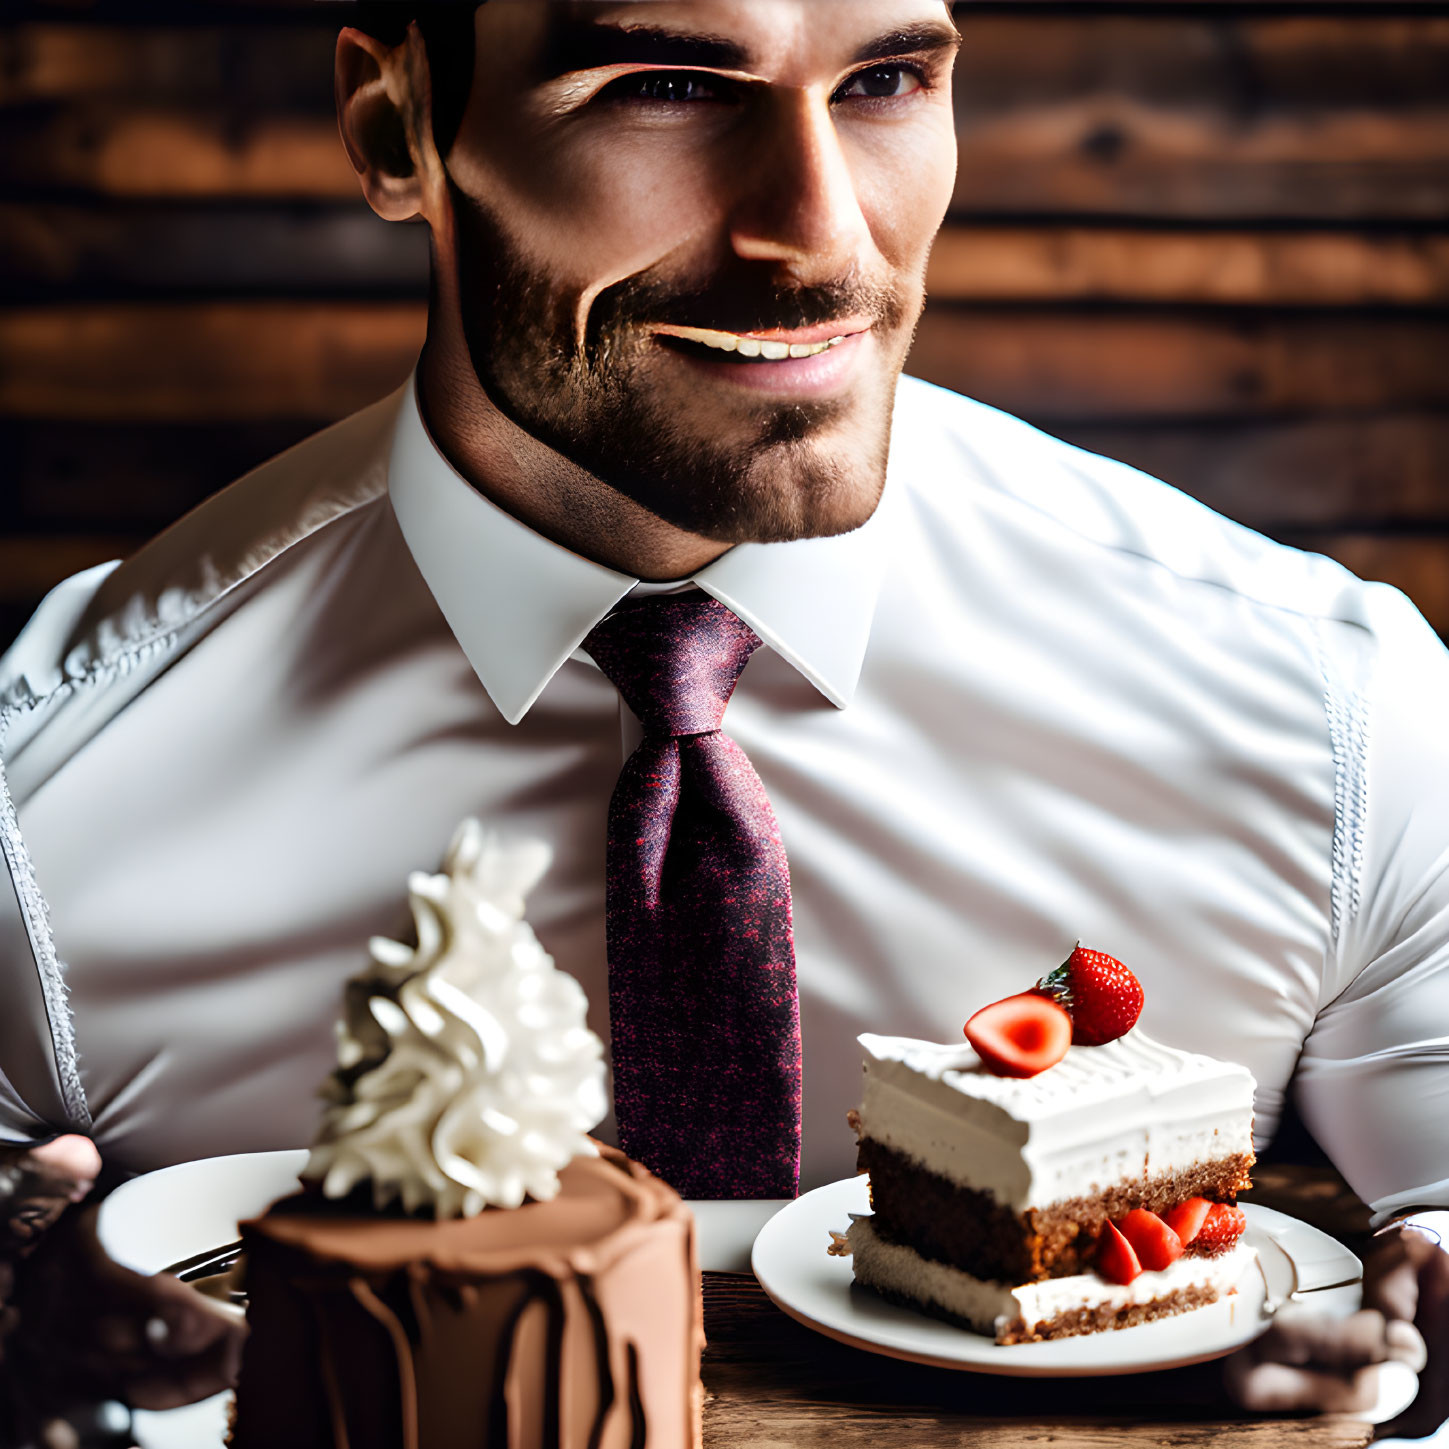 Smiling man in white shirt with cakes on table